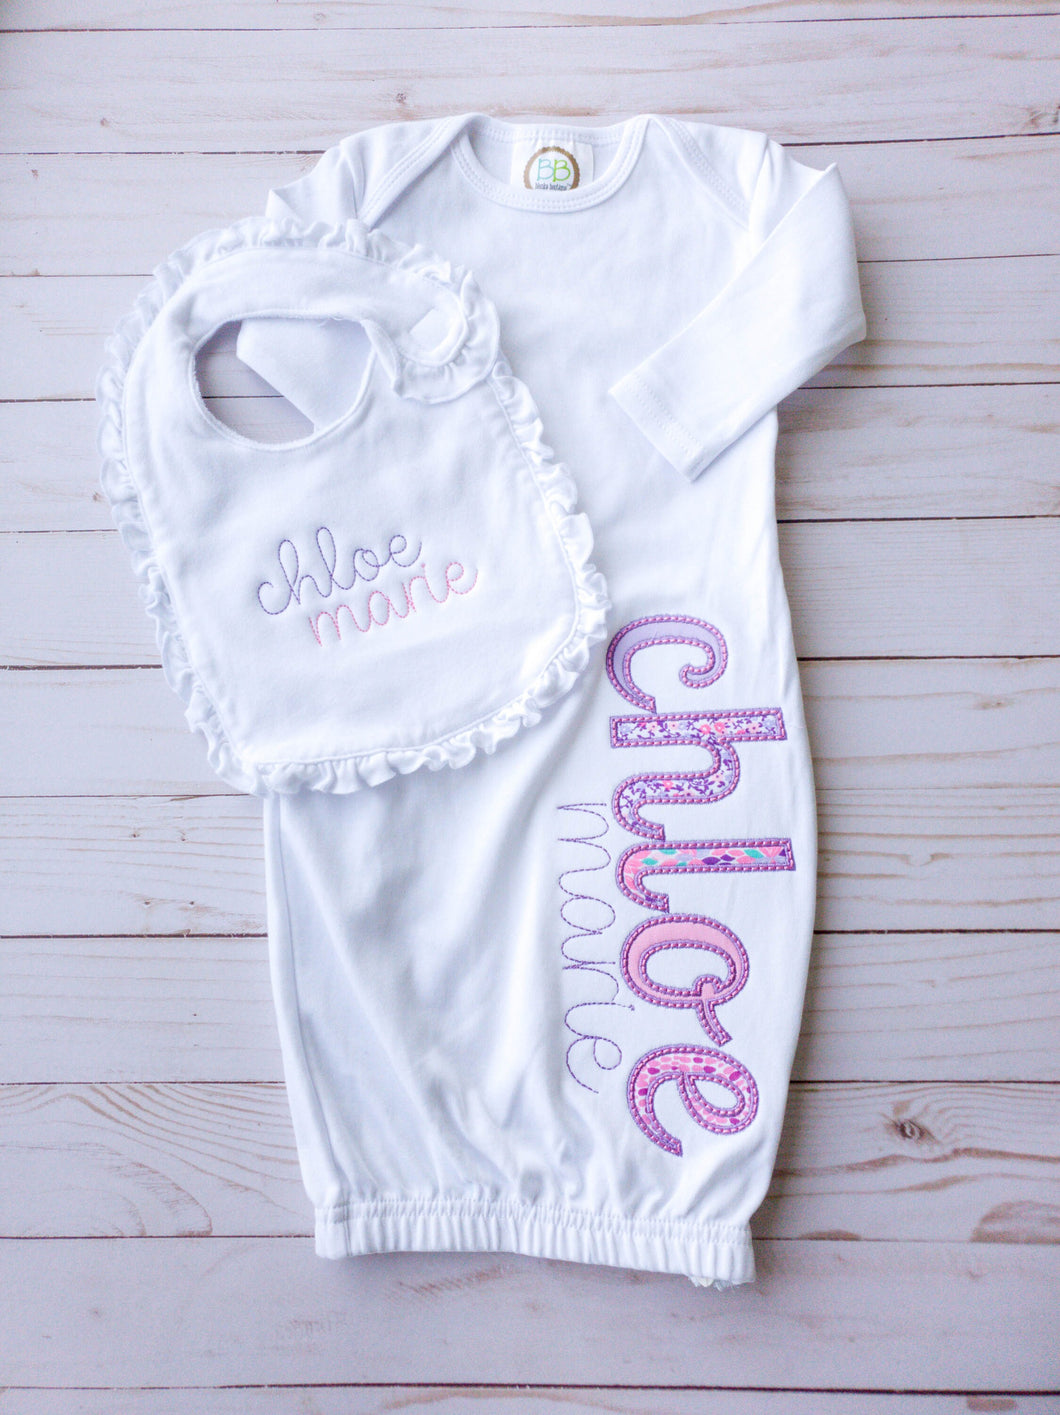 Personalized Baby Gown with Bib - Baby Shower Gift - Coming Home Outfit